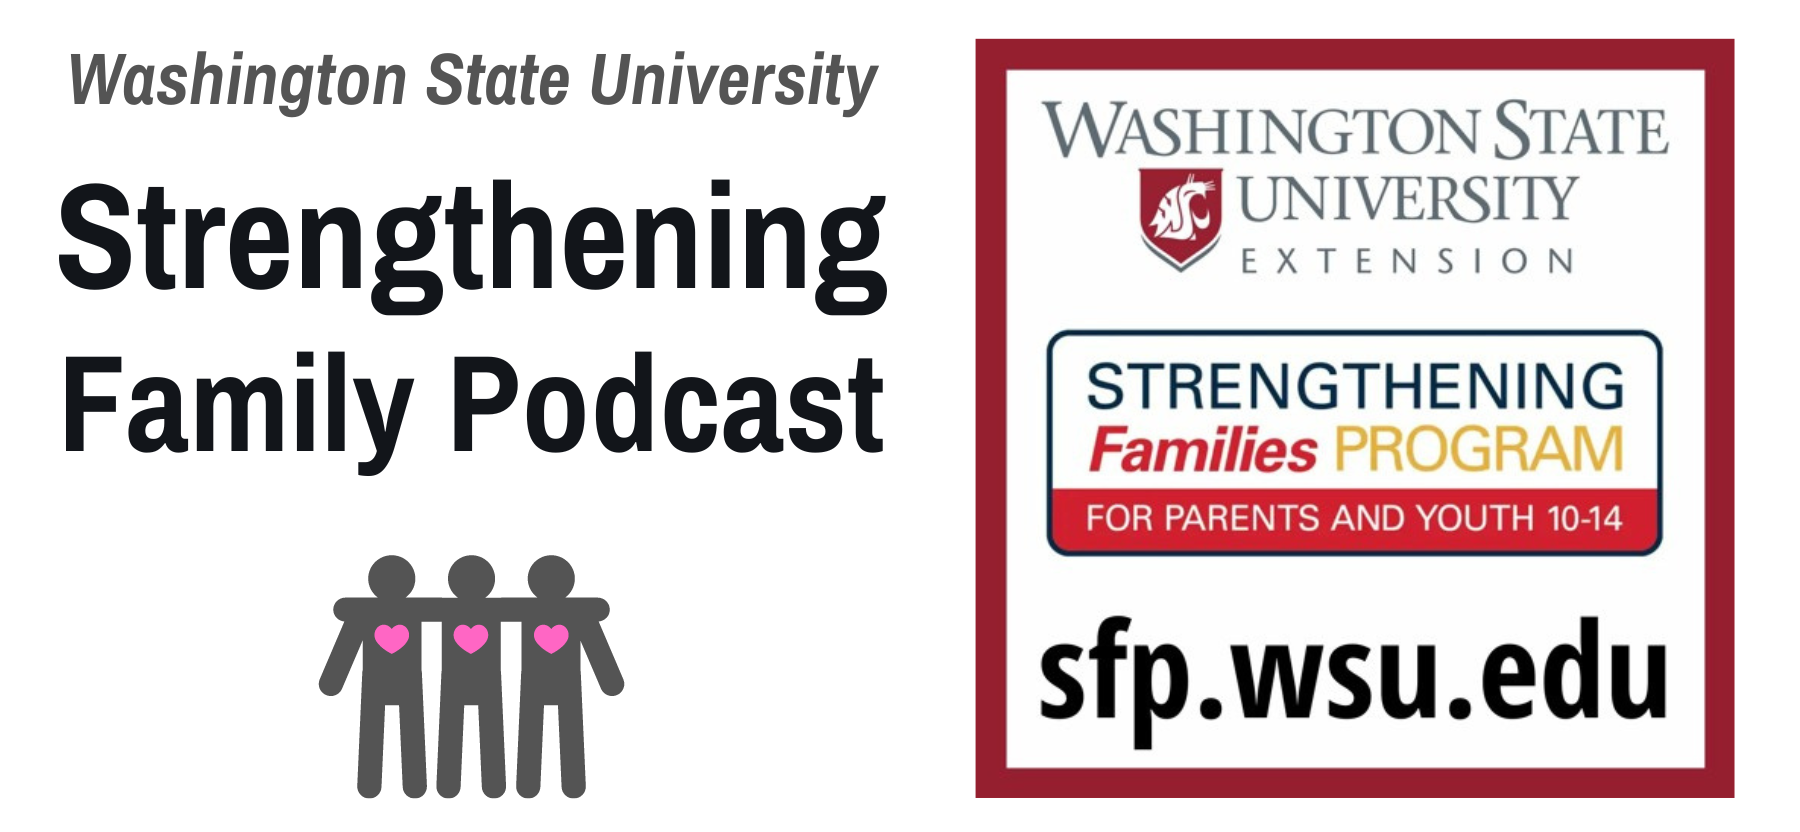 WSU Strengthening Family Podcast, Three People with Hearts